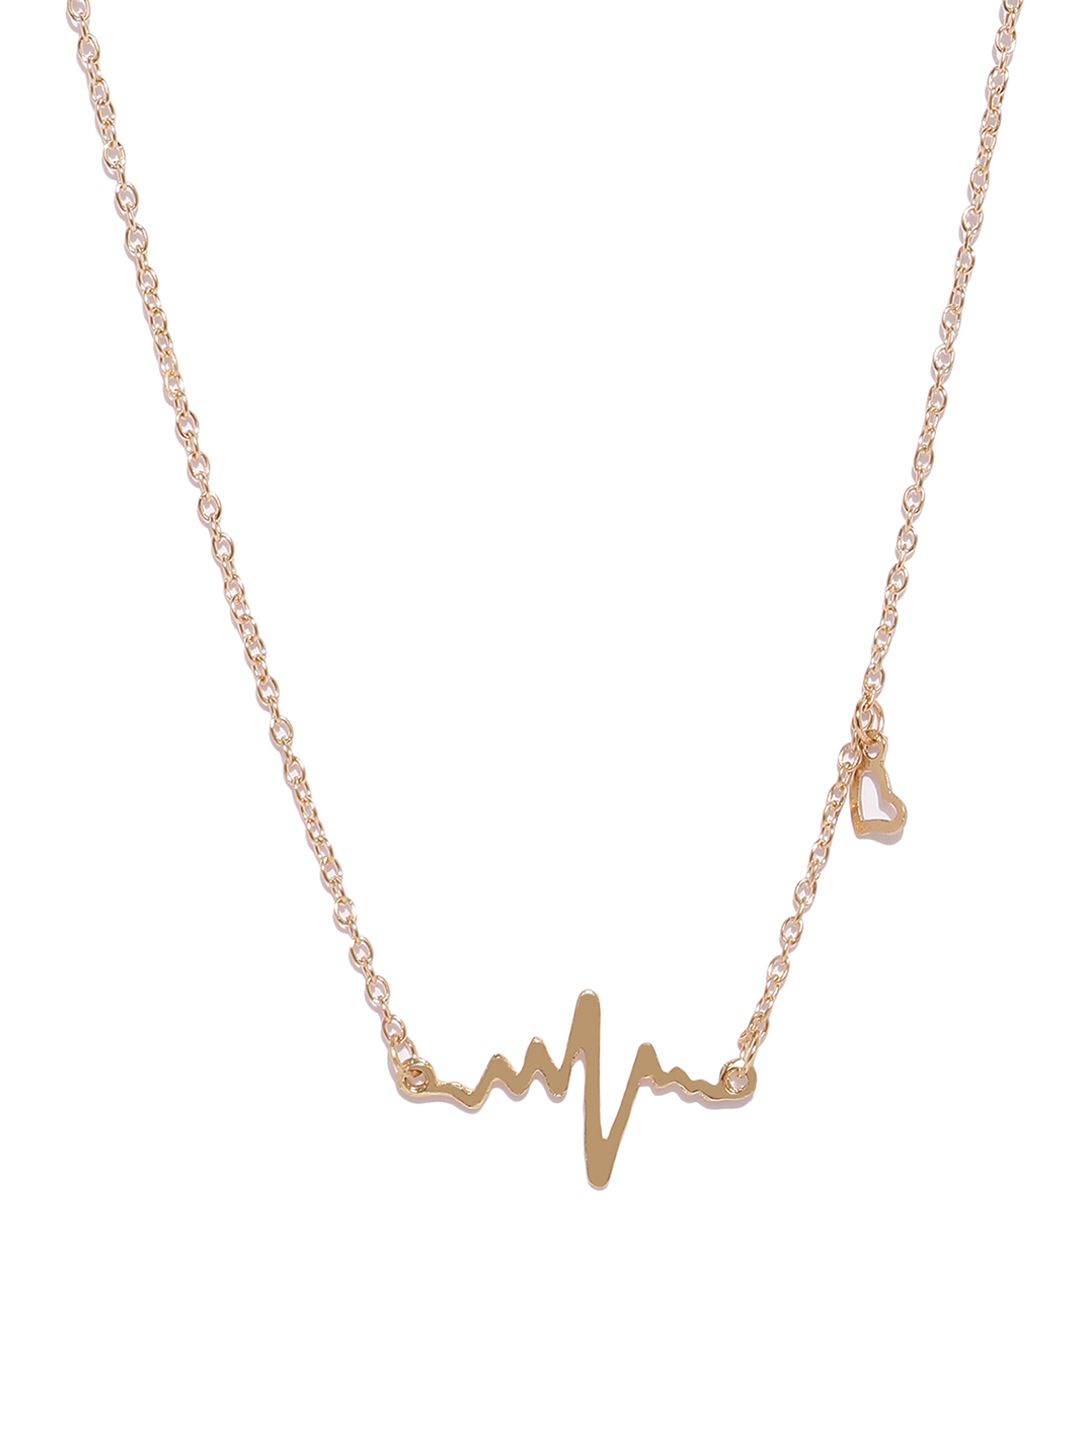 OOMPH Gold-Toned Metal Handcrafted Necklace Price in India